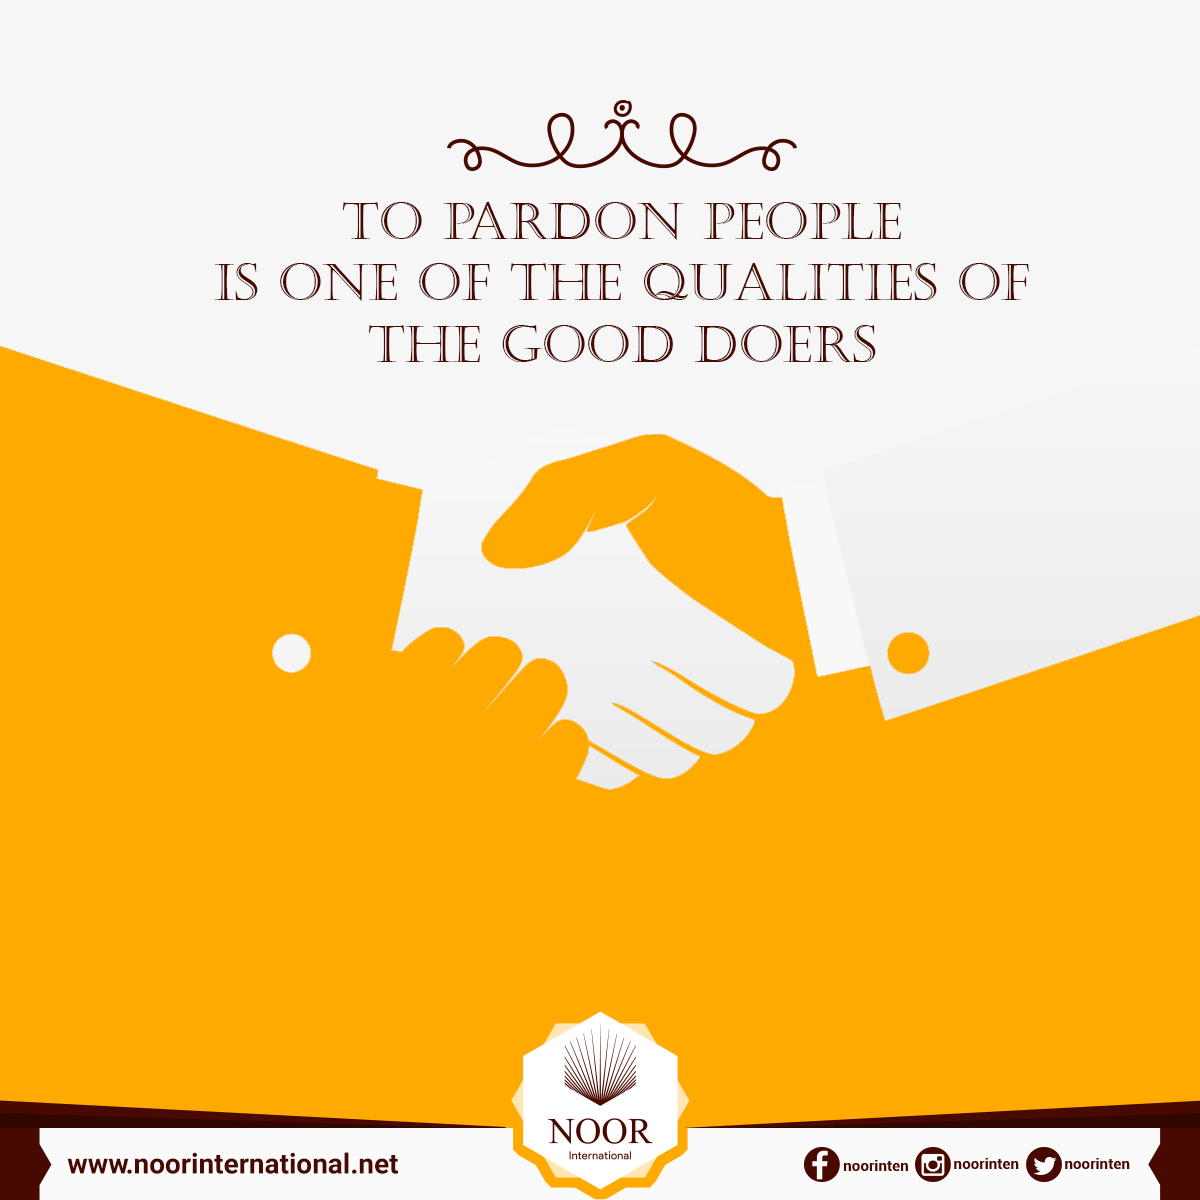 To pardon people is one of the qualities of the good doers